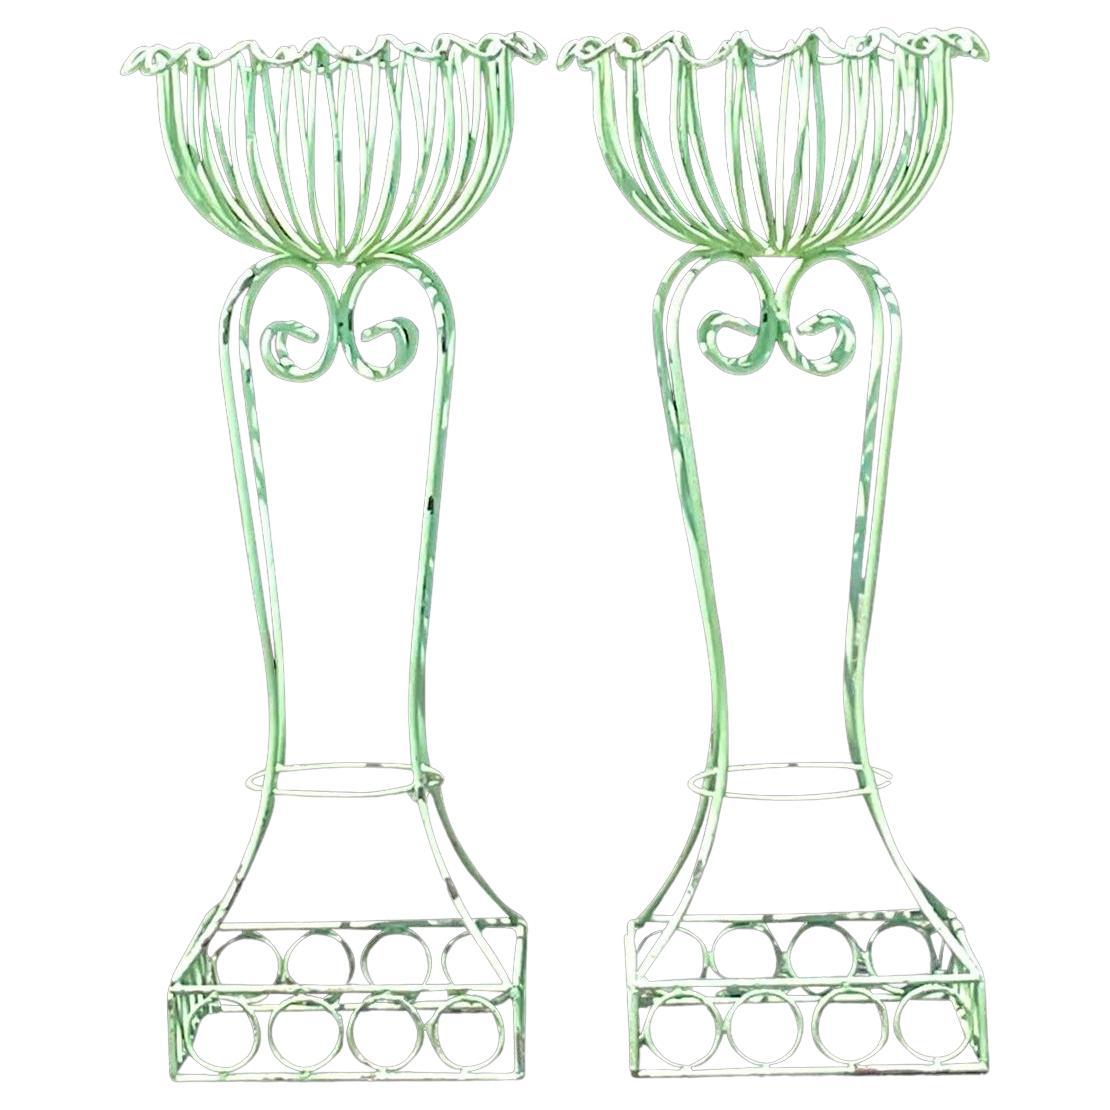 Vintage Regency Scalloped Wrought Iron Plant Stands - ein Paar